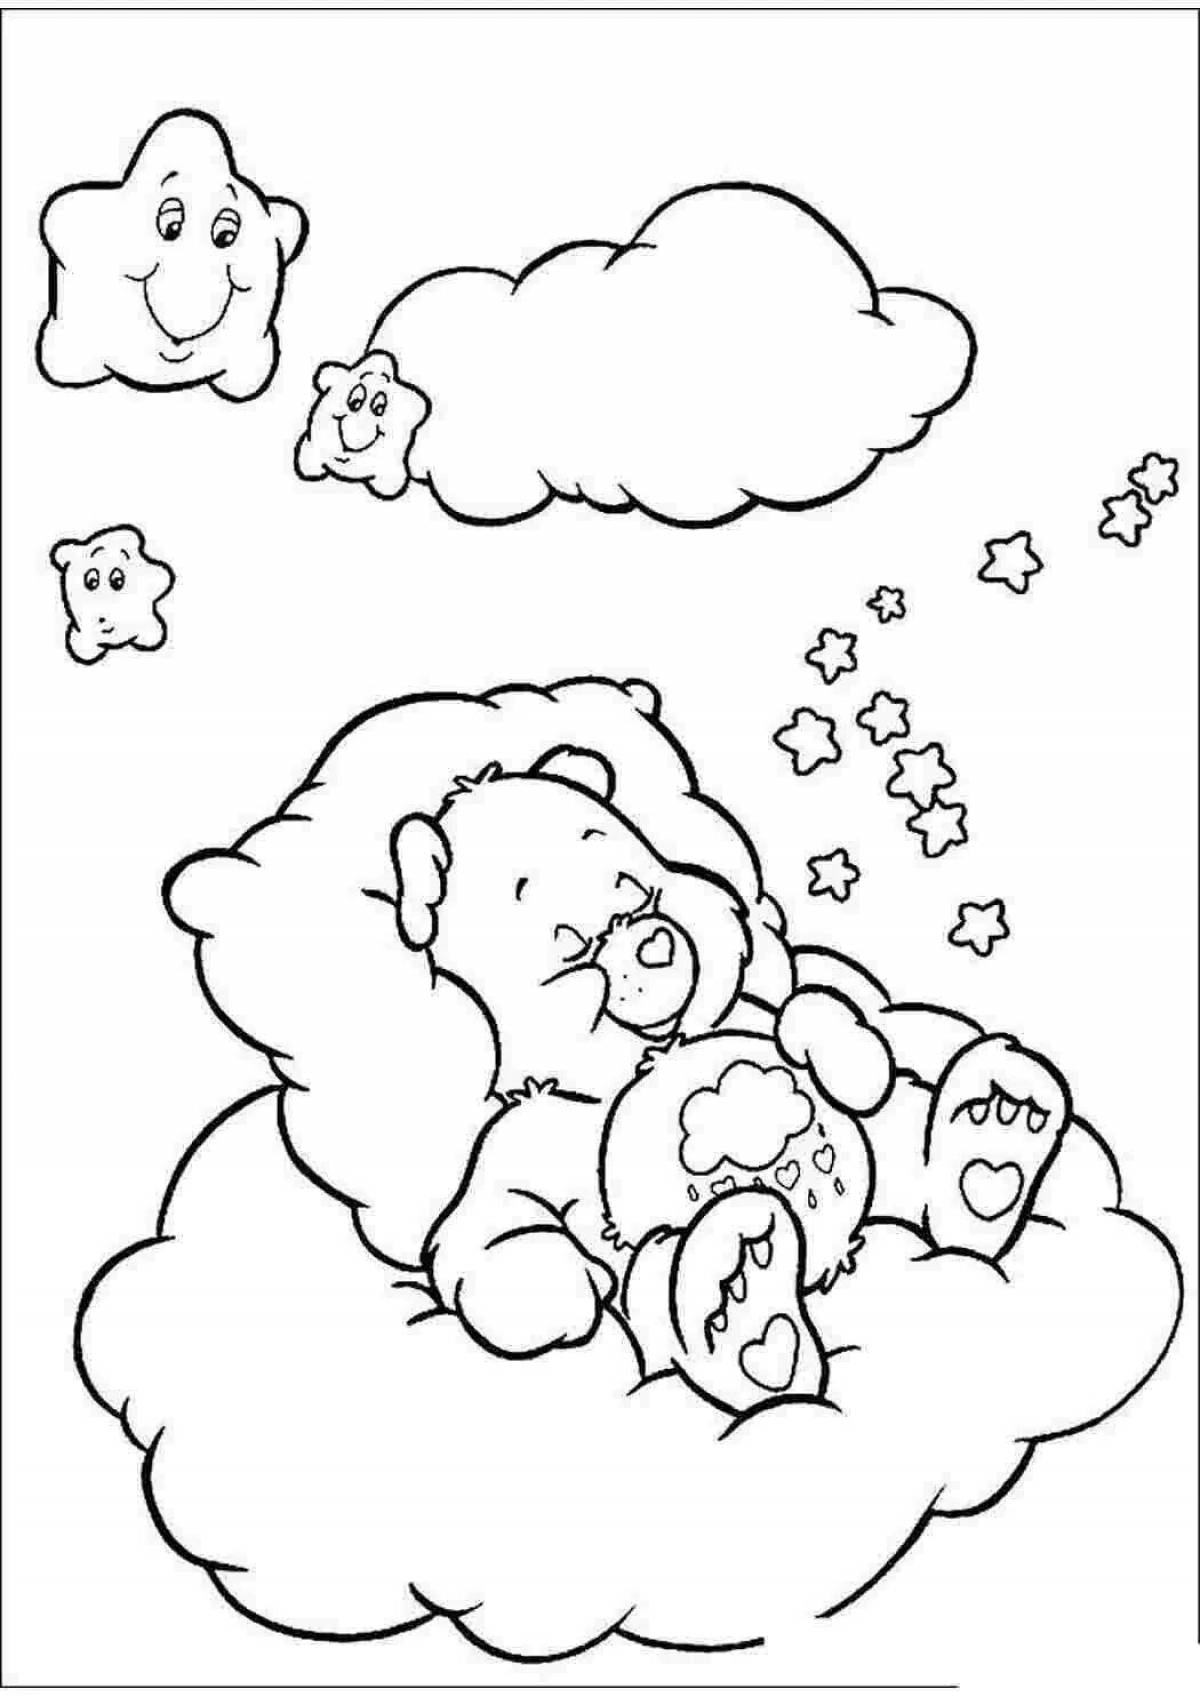 Lazy coloring of a sleeping bear